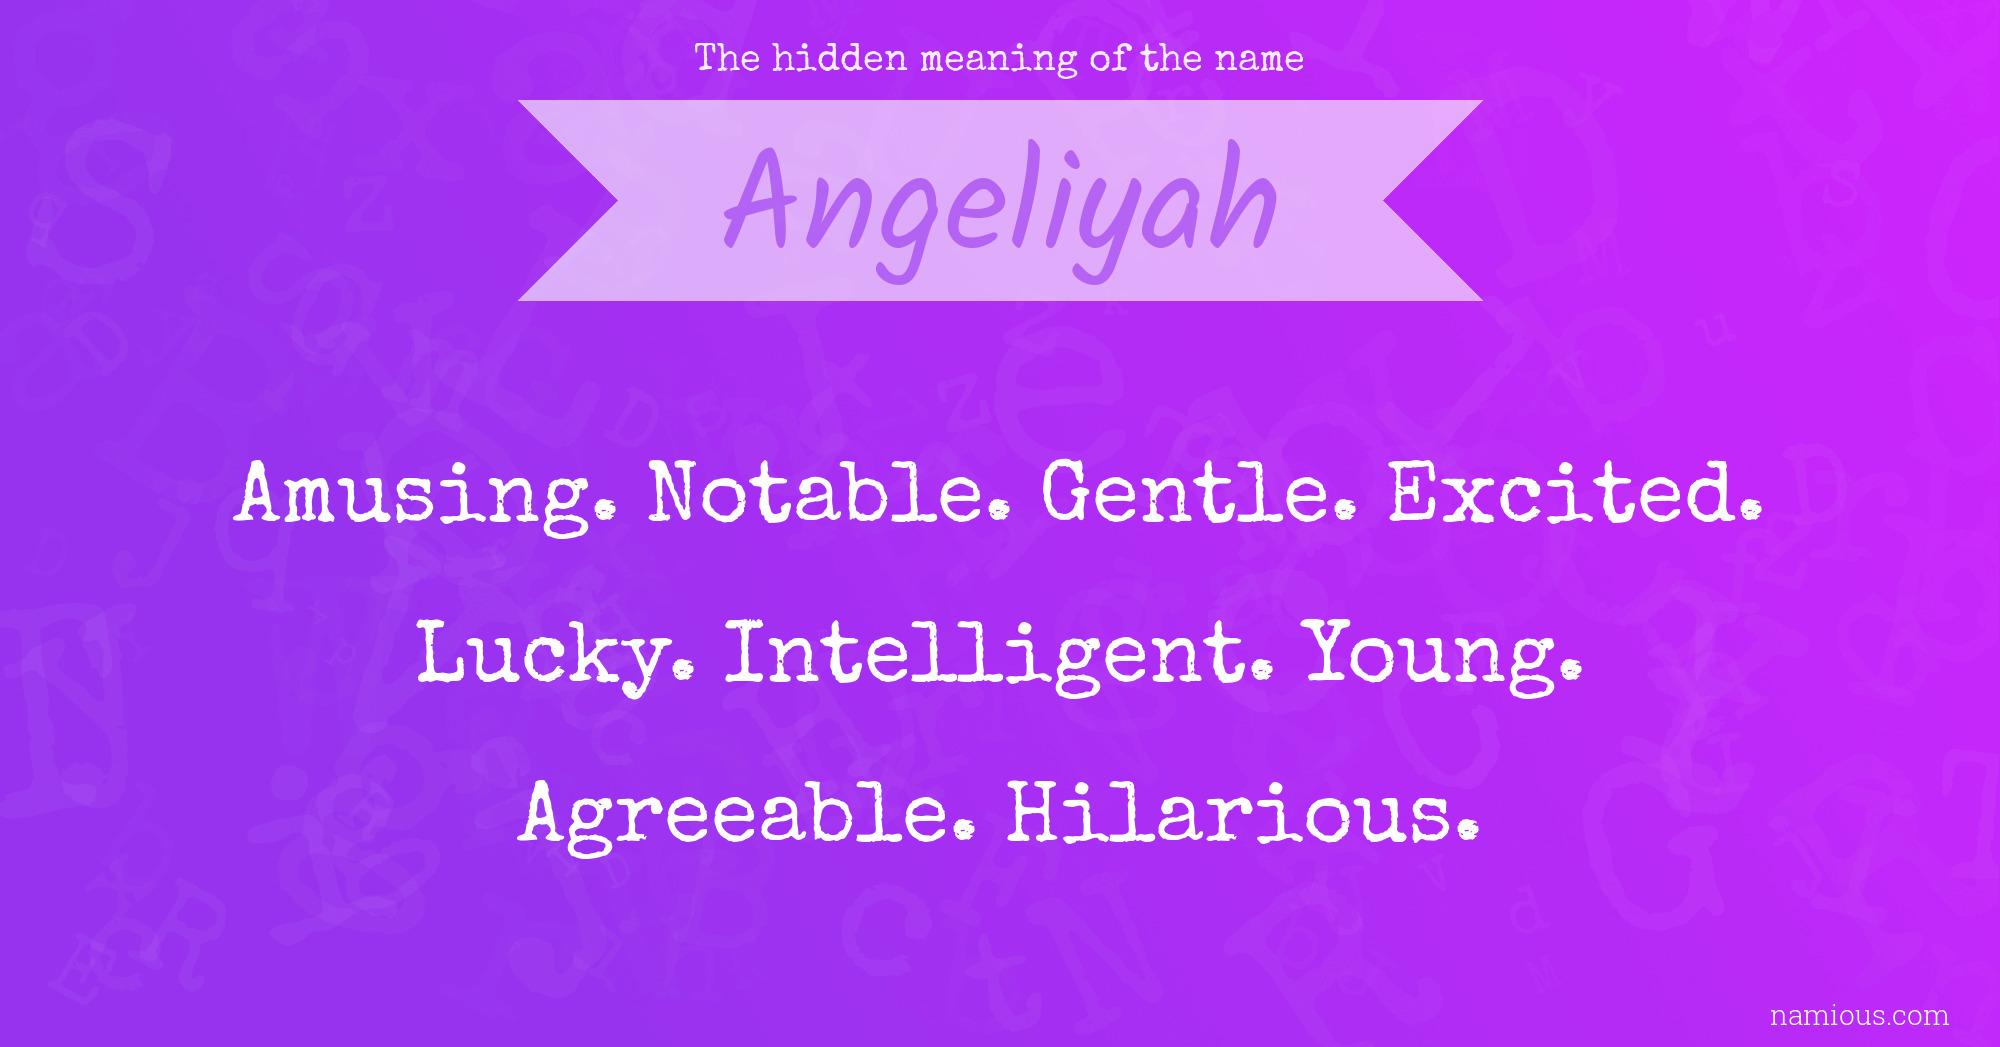 The hidden meaning of the name Angeliyah